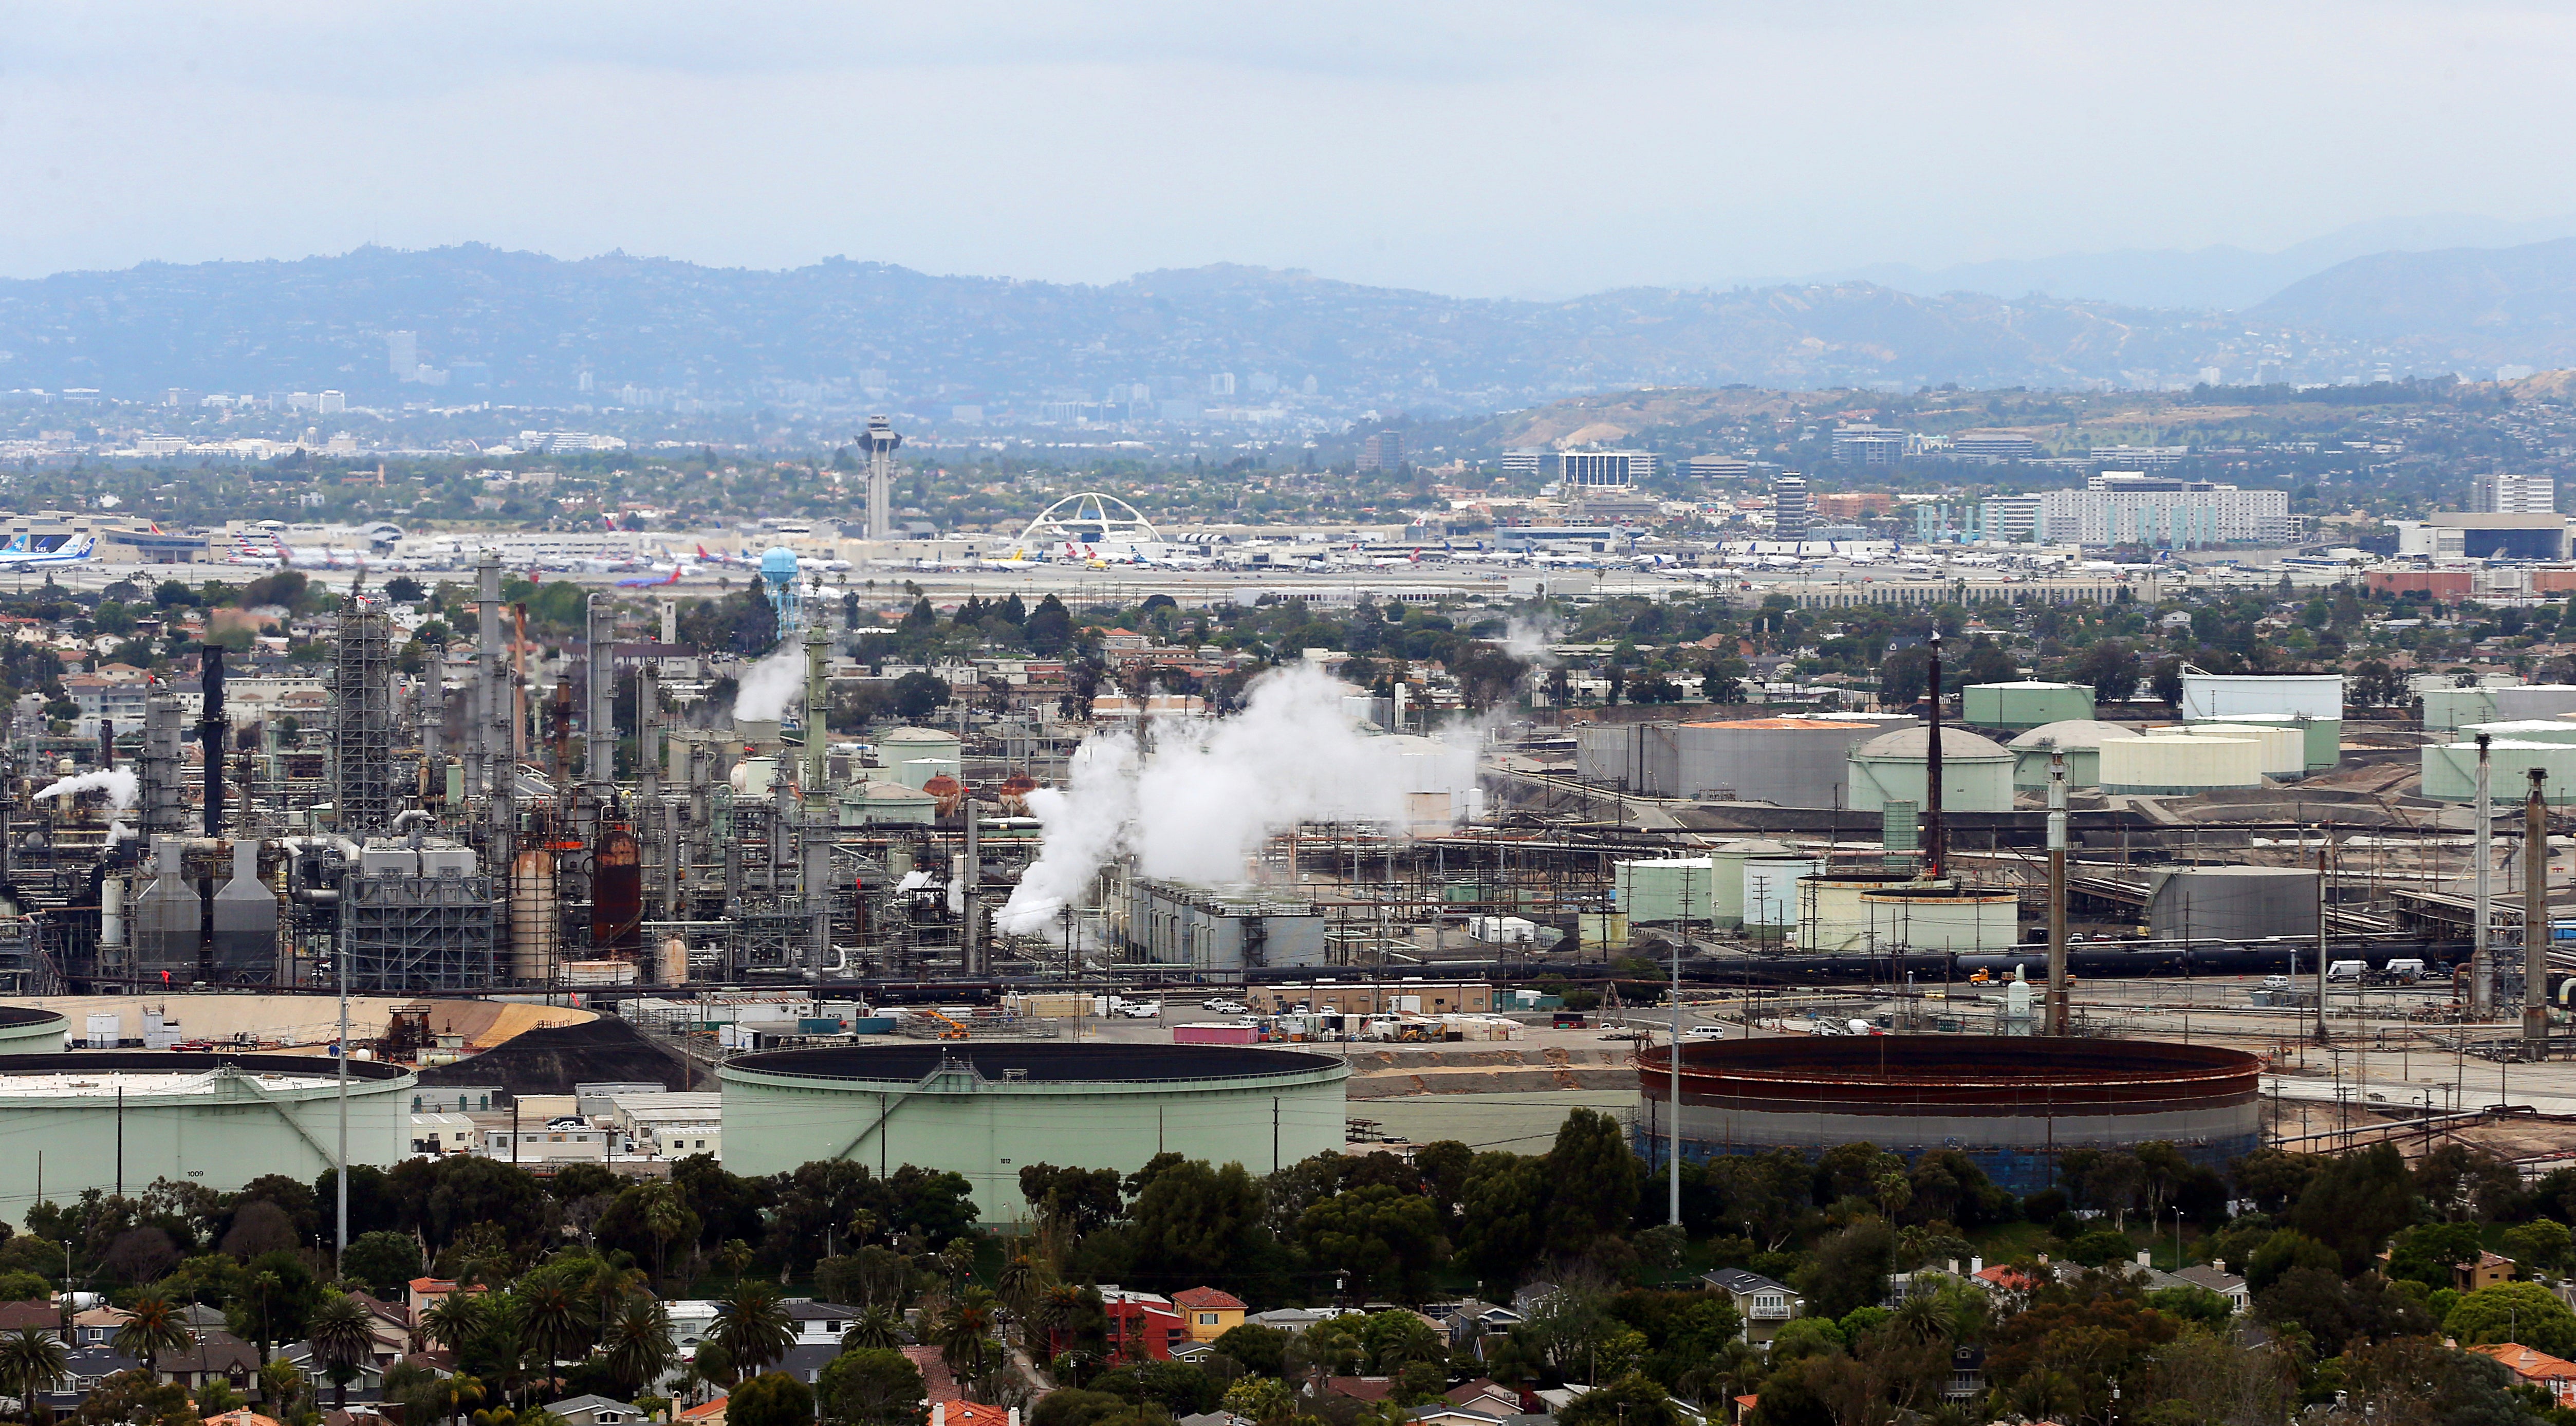 Refineries Pollution Rules